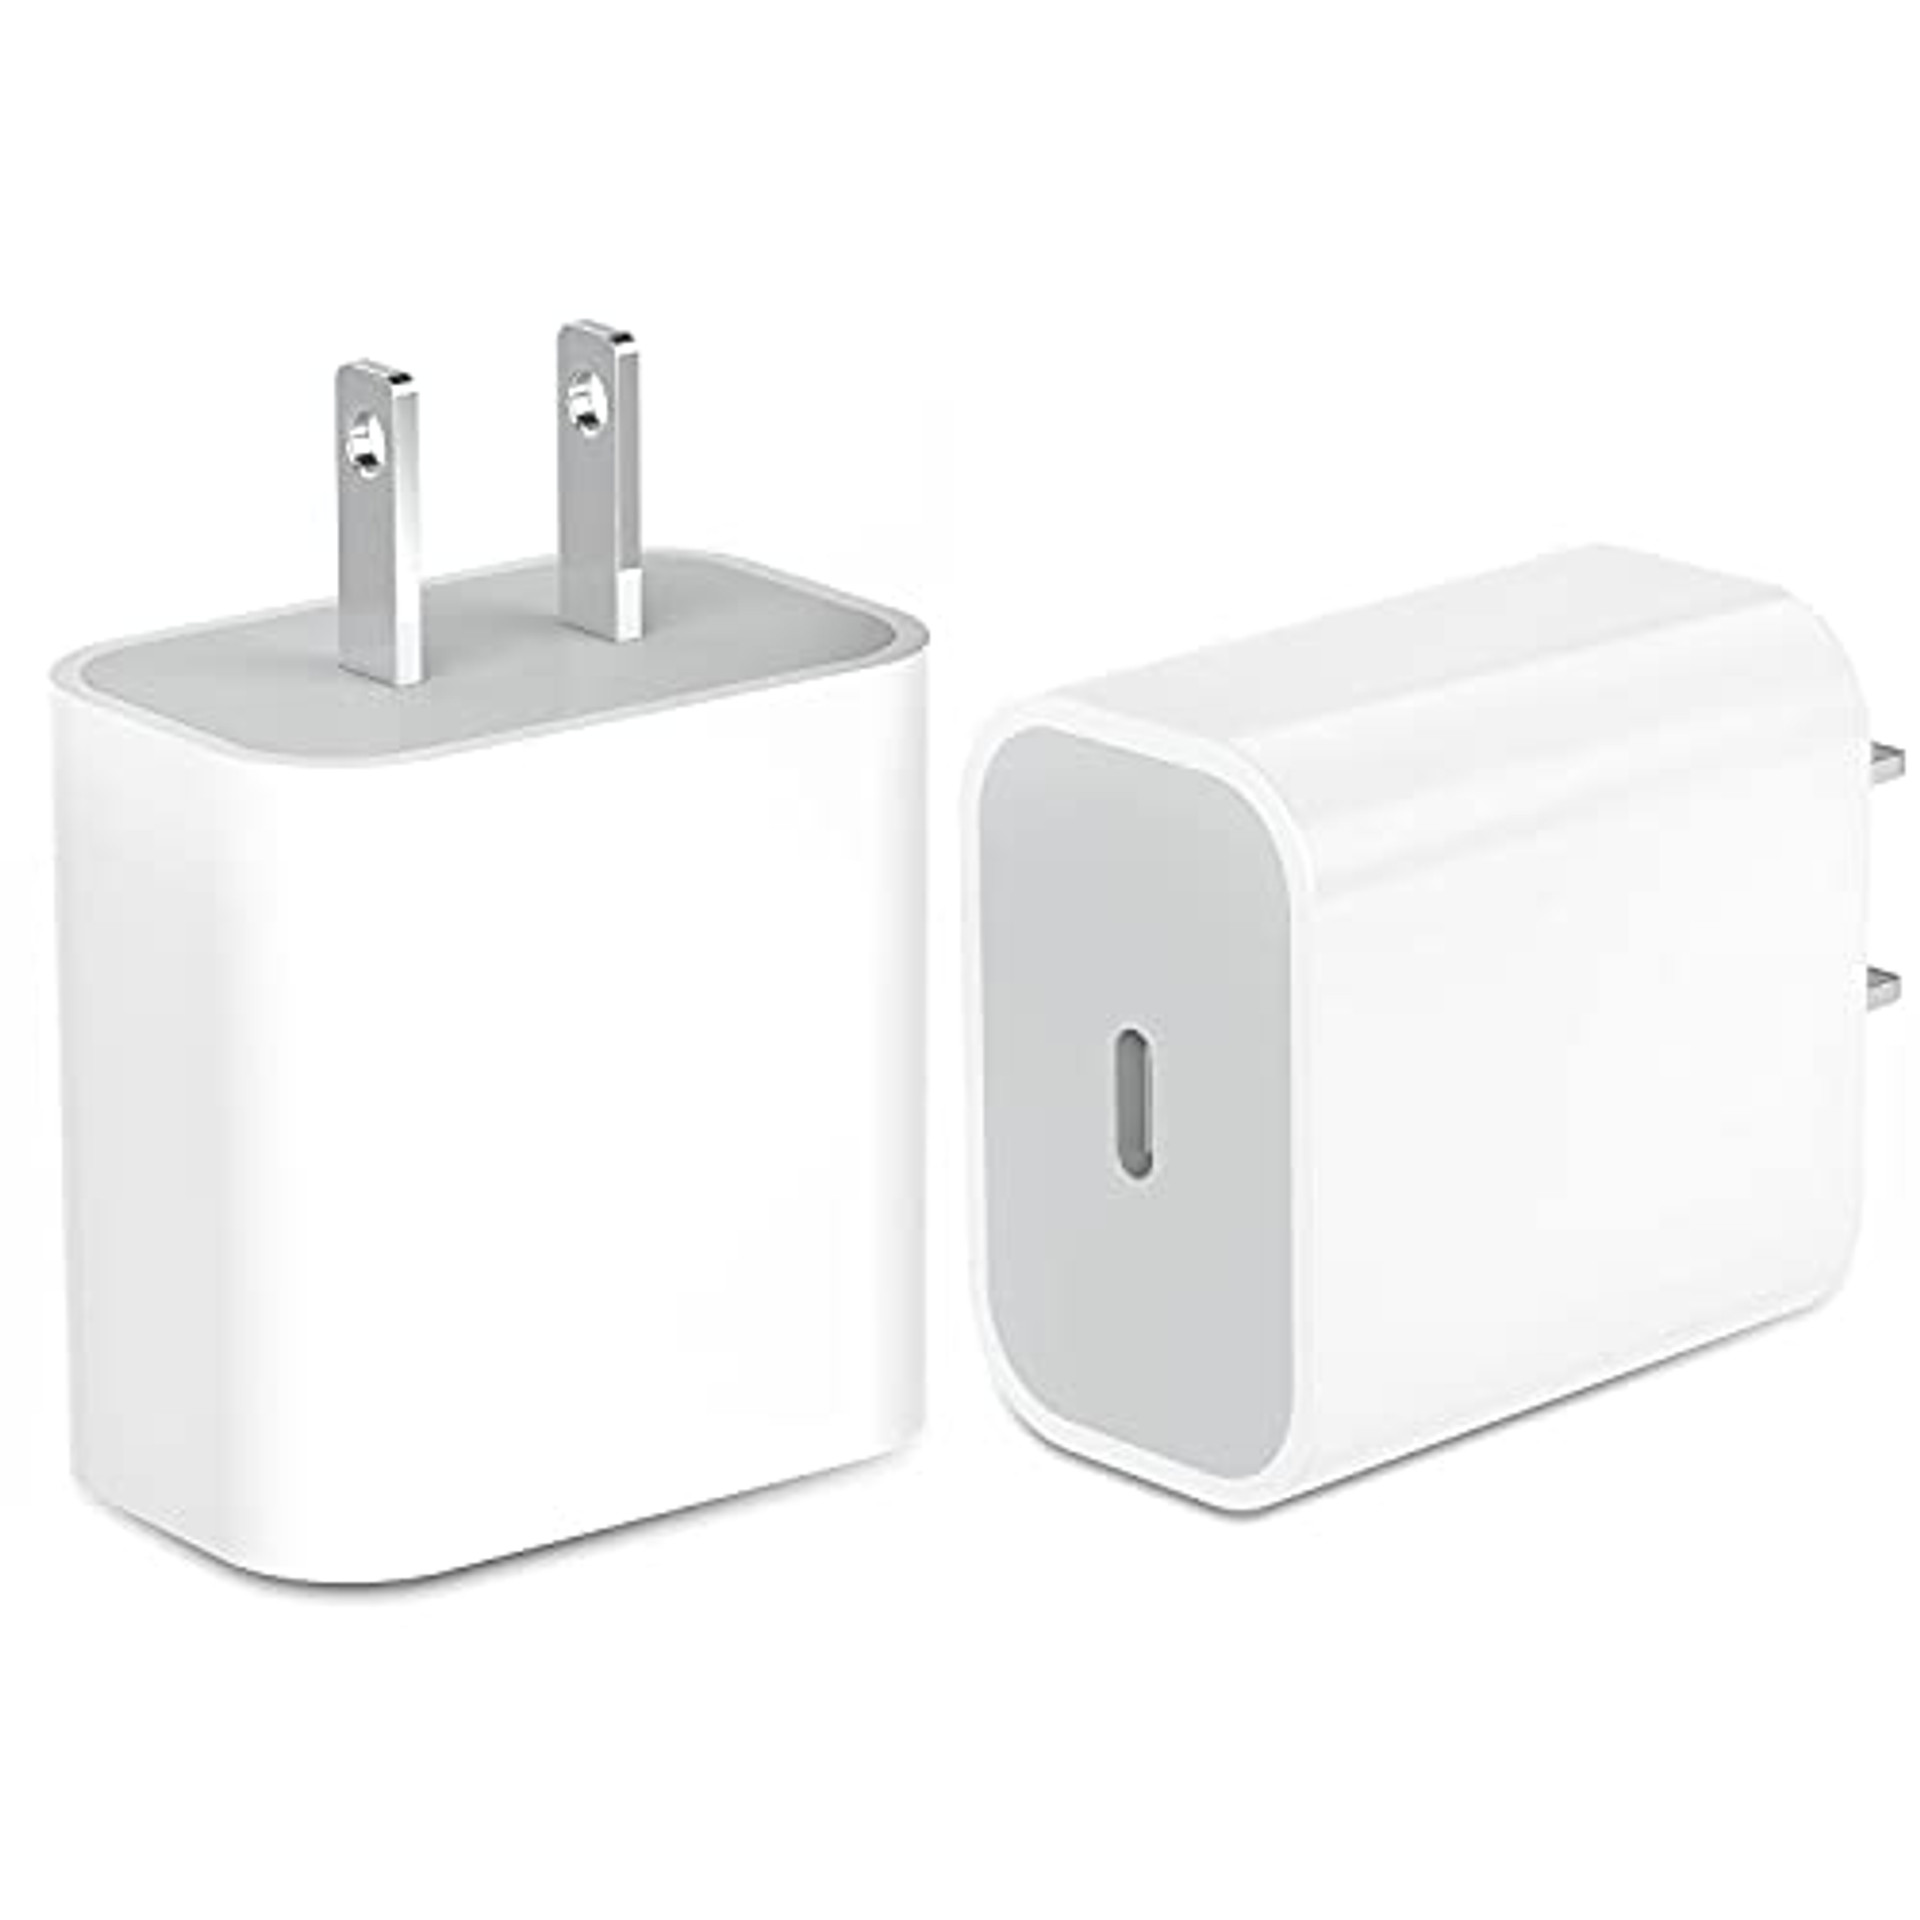 USB C Charger-20W iPhone 12 Fast Charger Block USB Type C Wall Charger ...